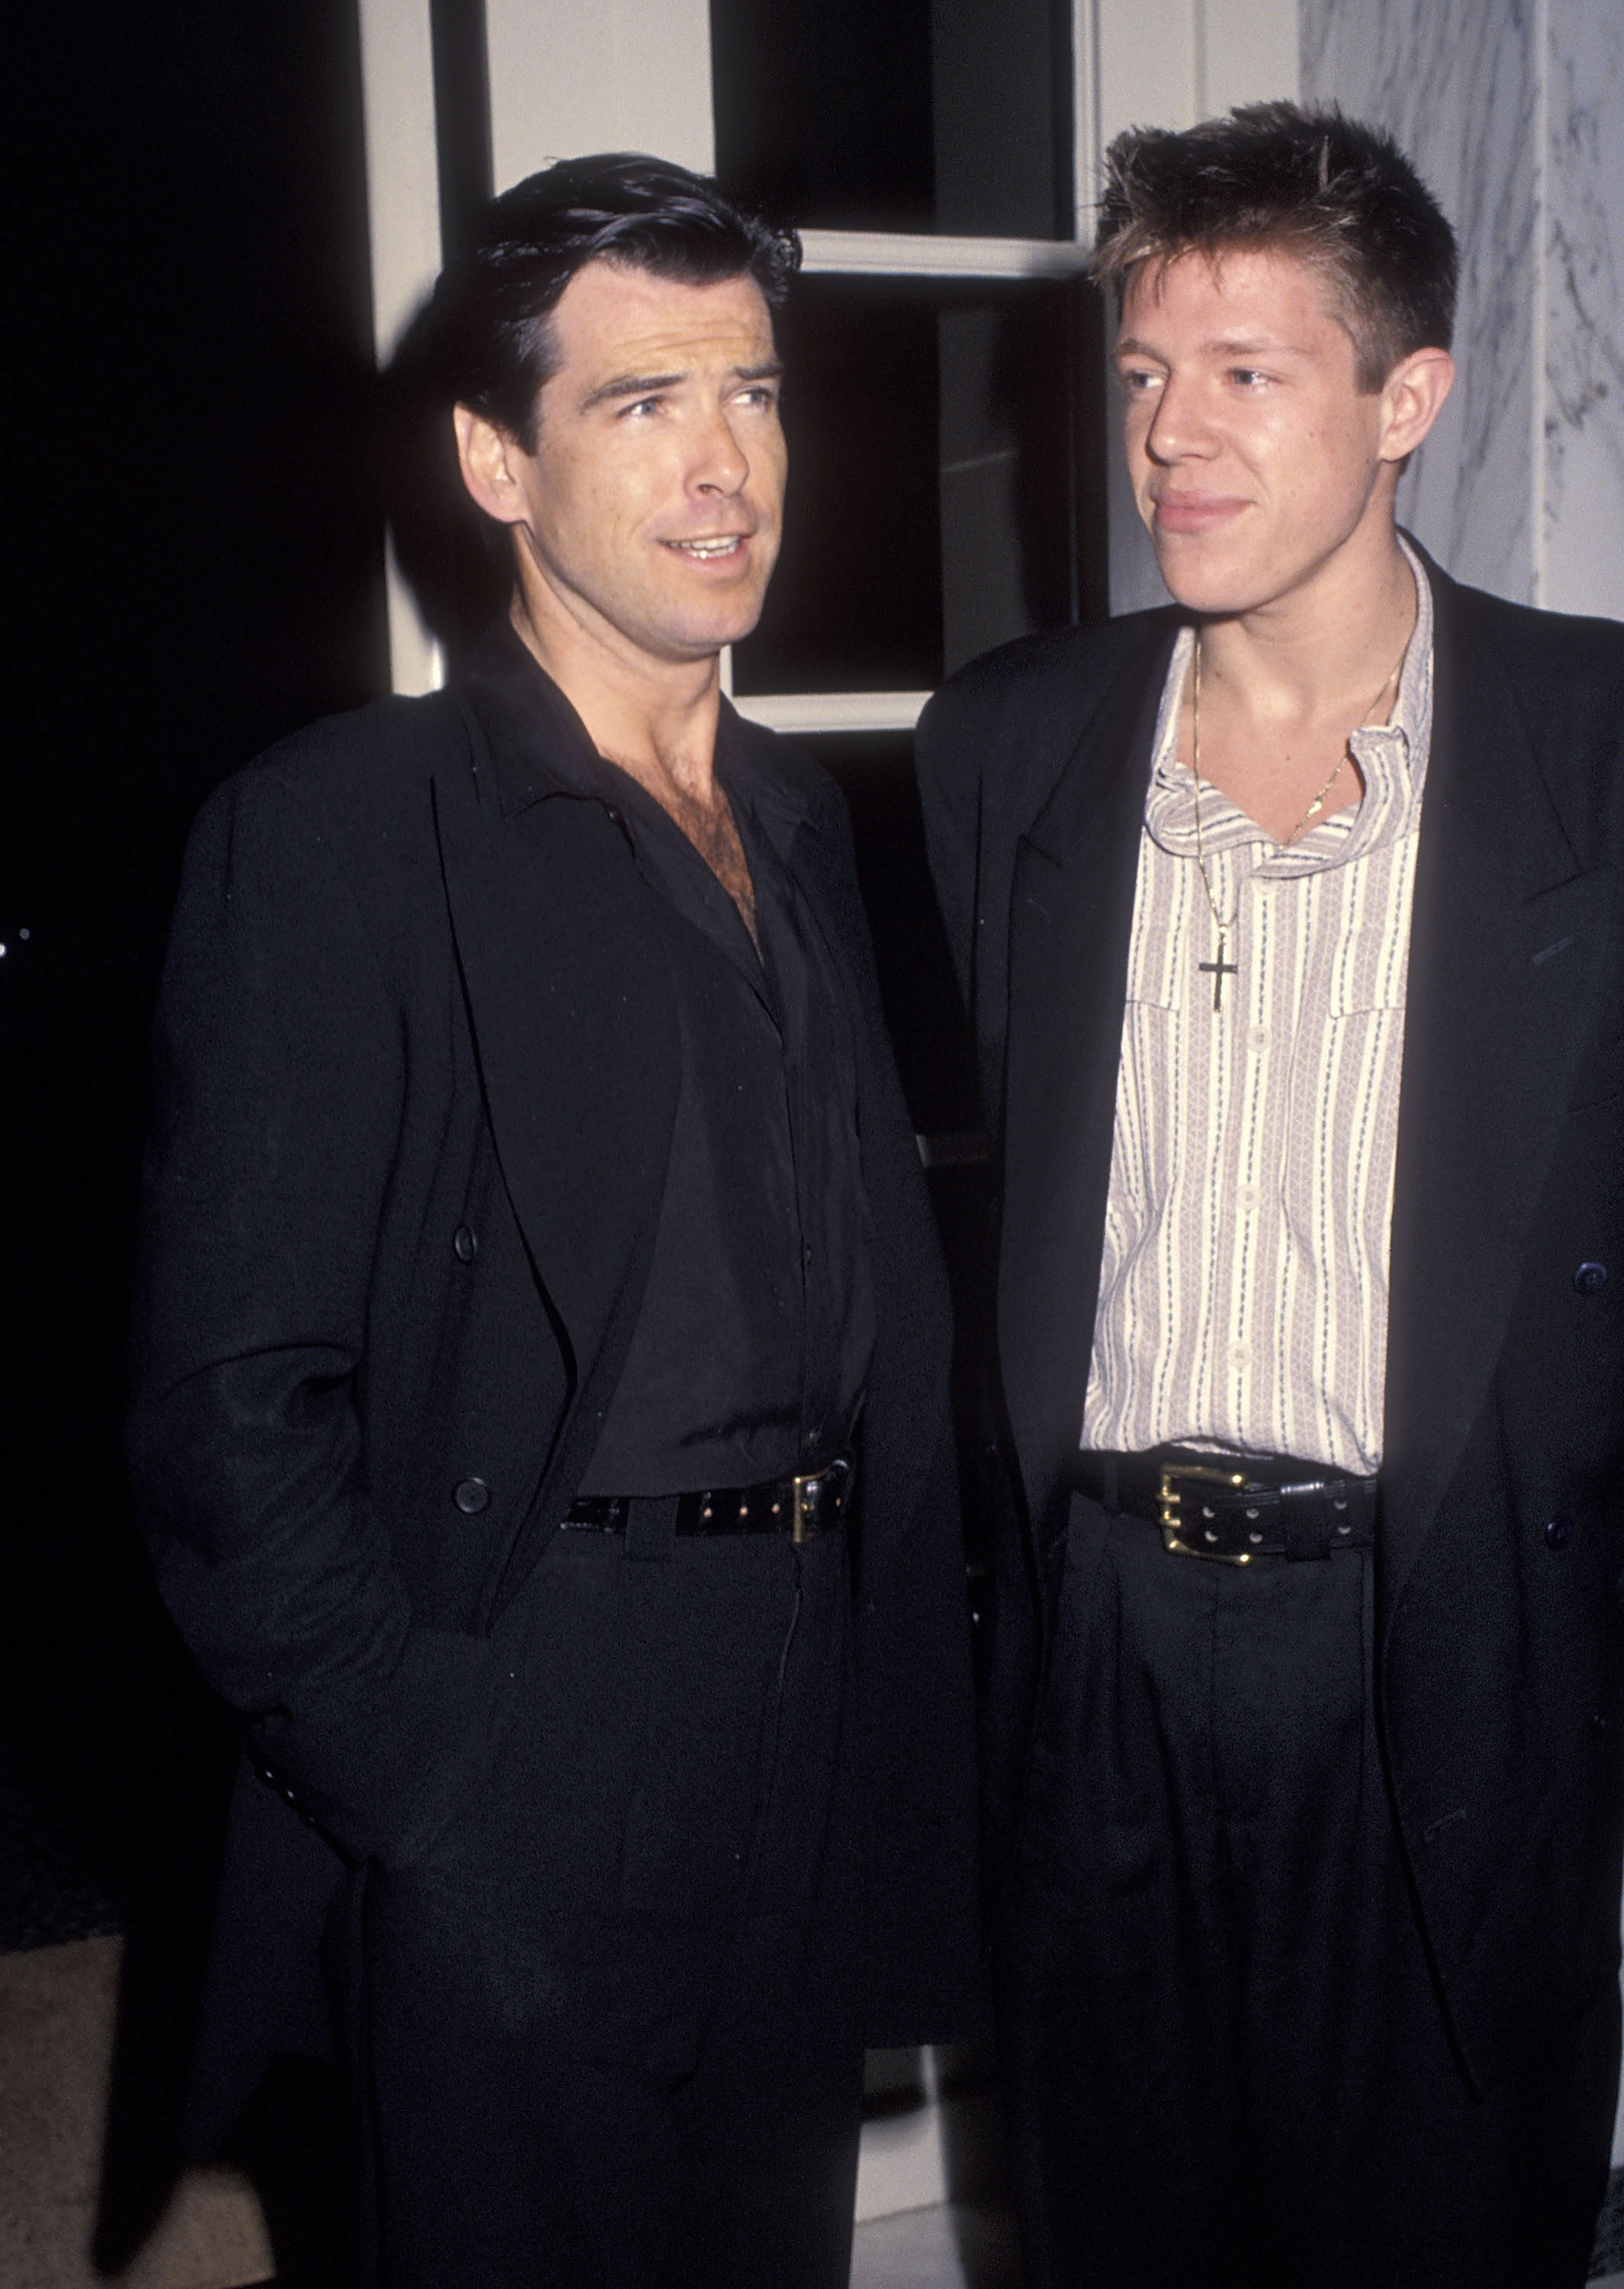 Pierce Brosnan and son Christopher at the American Cinema Awards in Los Angeles in 1994 | Source: Getty Images